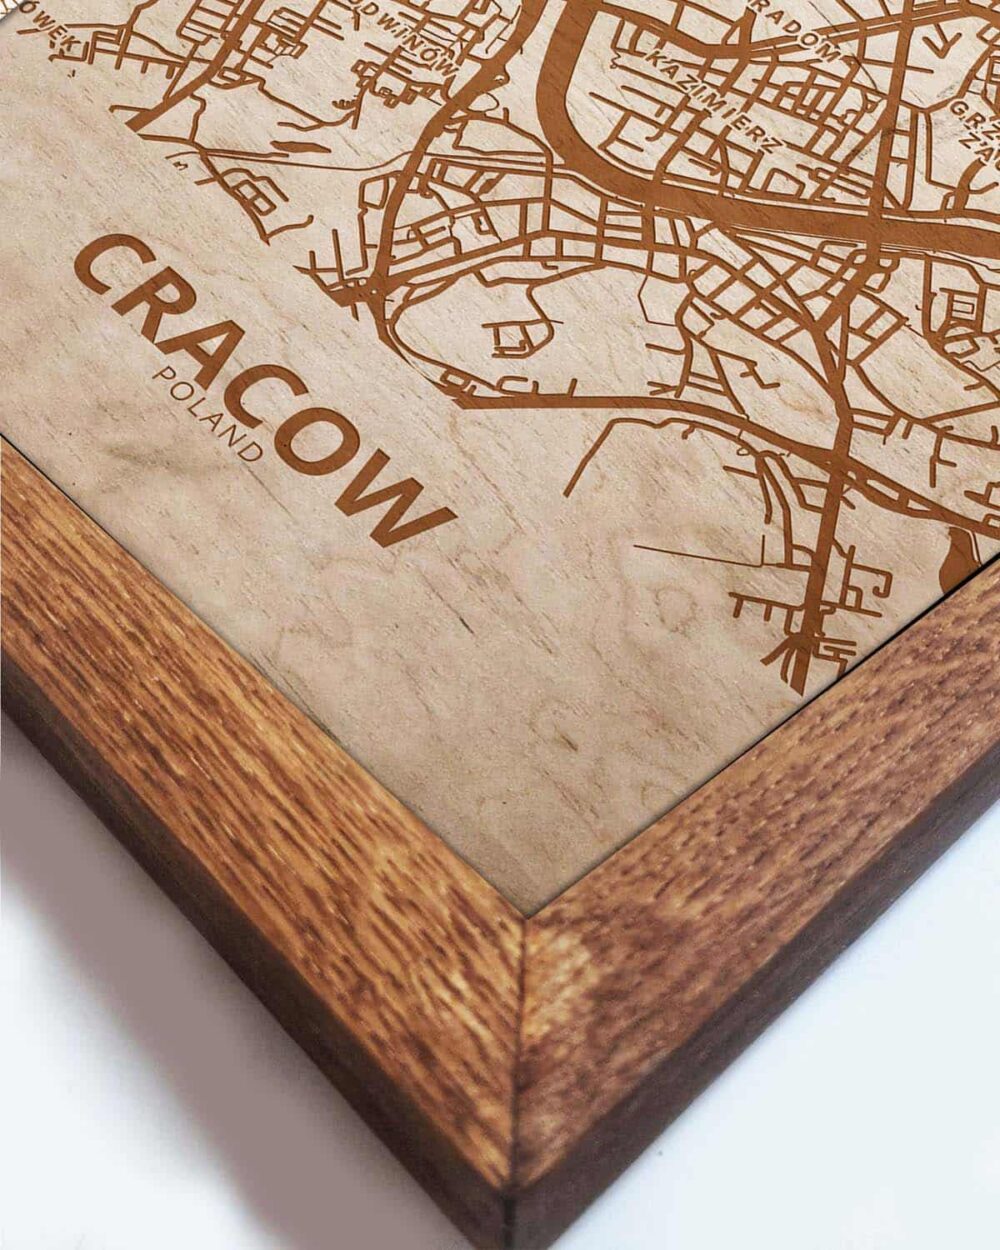 Wooden Street Map of Cracow - Urban City Plan 1